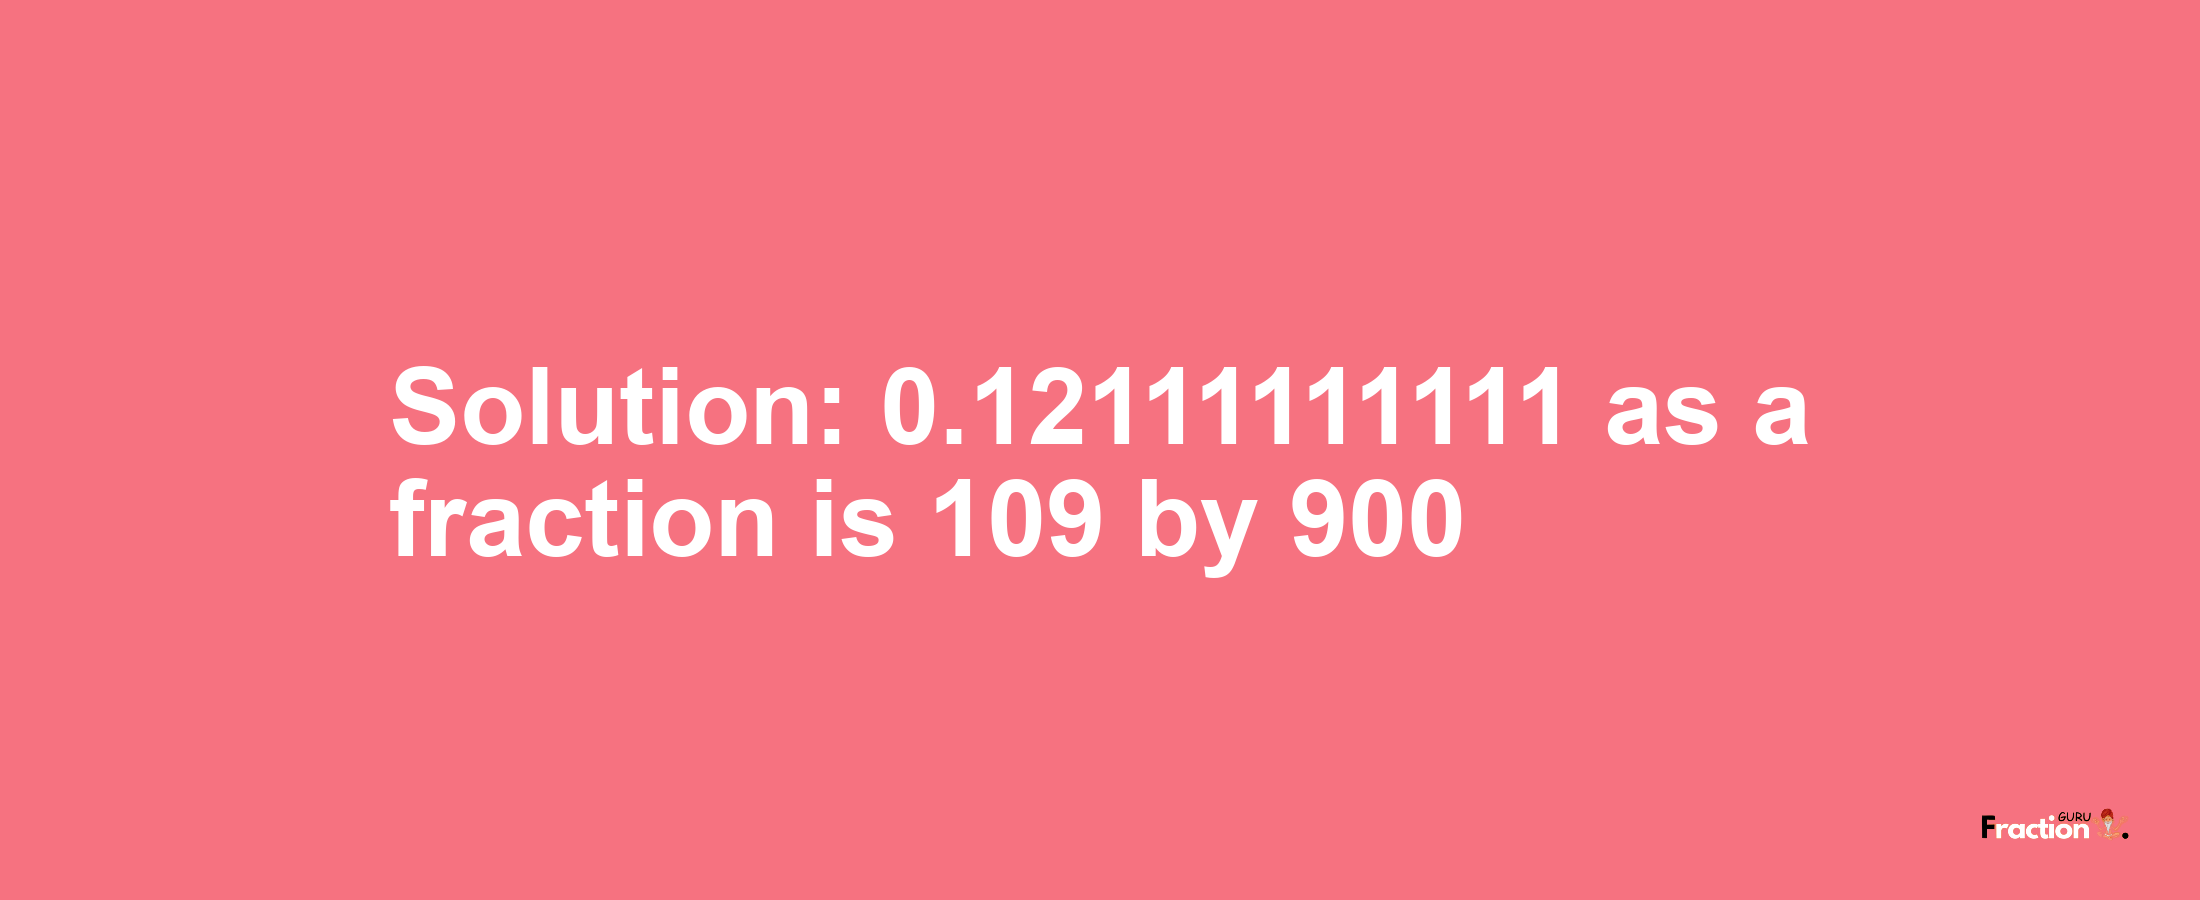 Solution:0.12111111111 as a fraction is 109/900